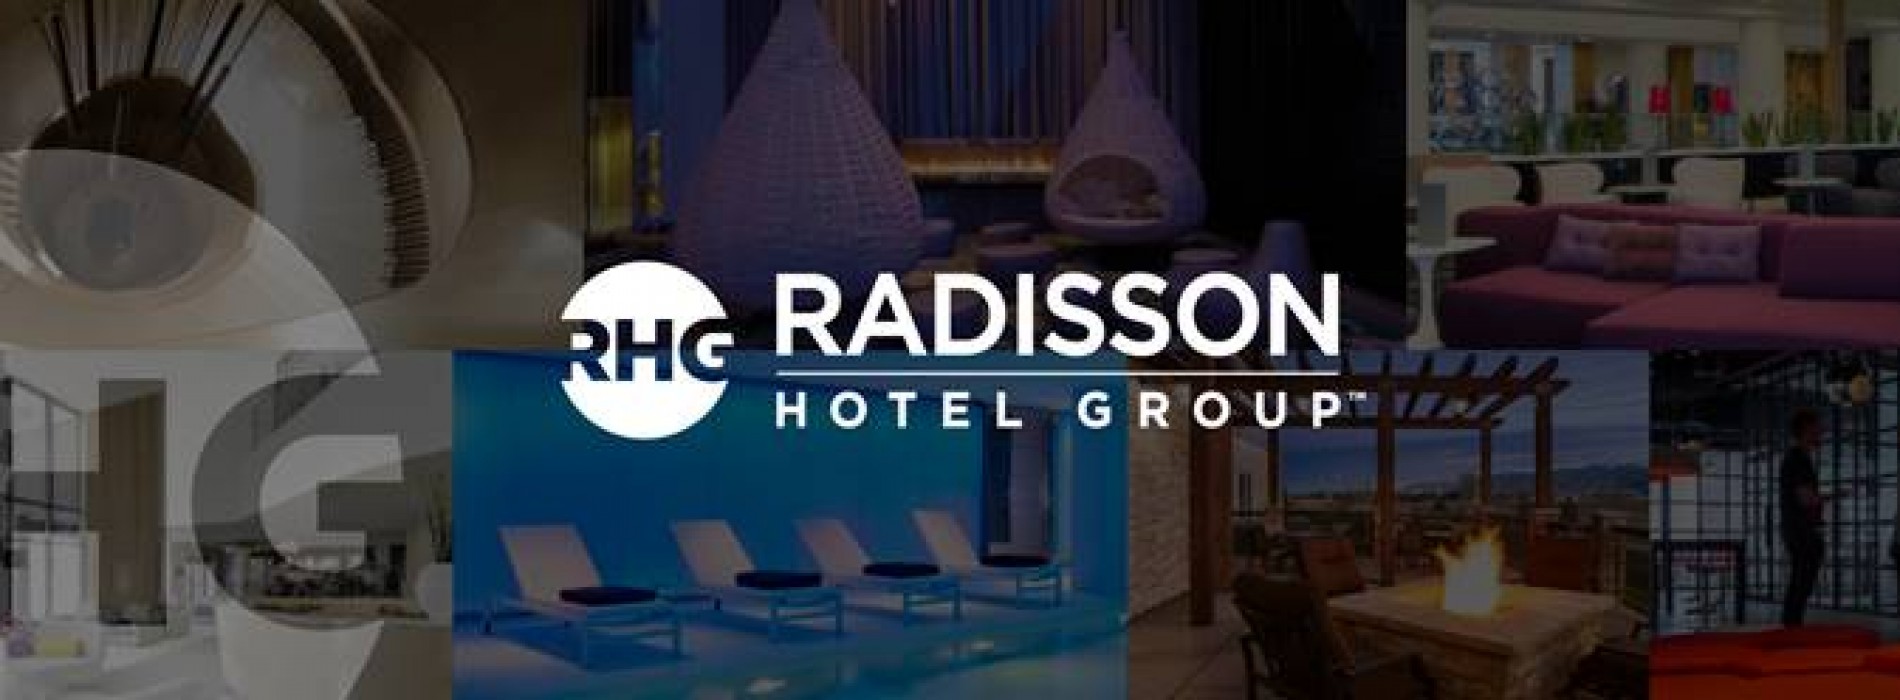 Radisson Hotel Group aims for 200 hotels in South Asia by 2022